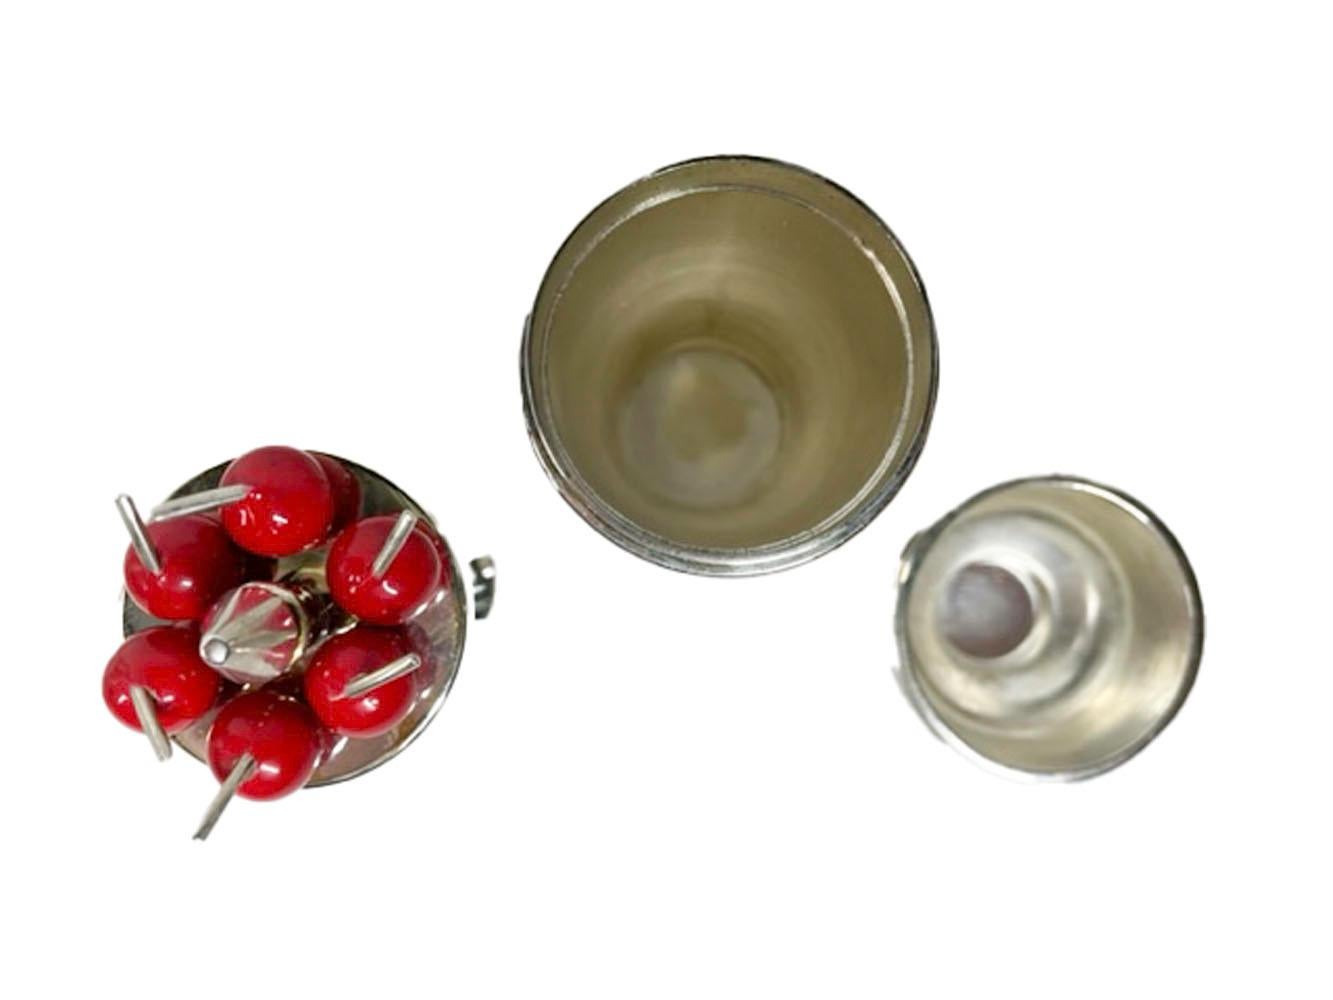 Vintage silver plate jigger and cocktail pick set, private labeled for Neiman Marcus and attributed to P.H. Vogel & Co of Birmingham, England. A set of six forked cocktail picks with red cherry tops in a stand fitted into a covered jigger in the